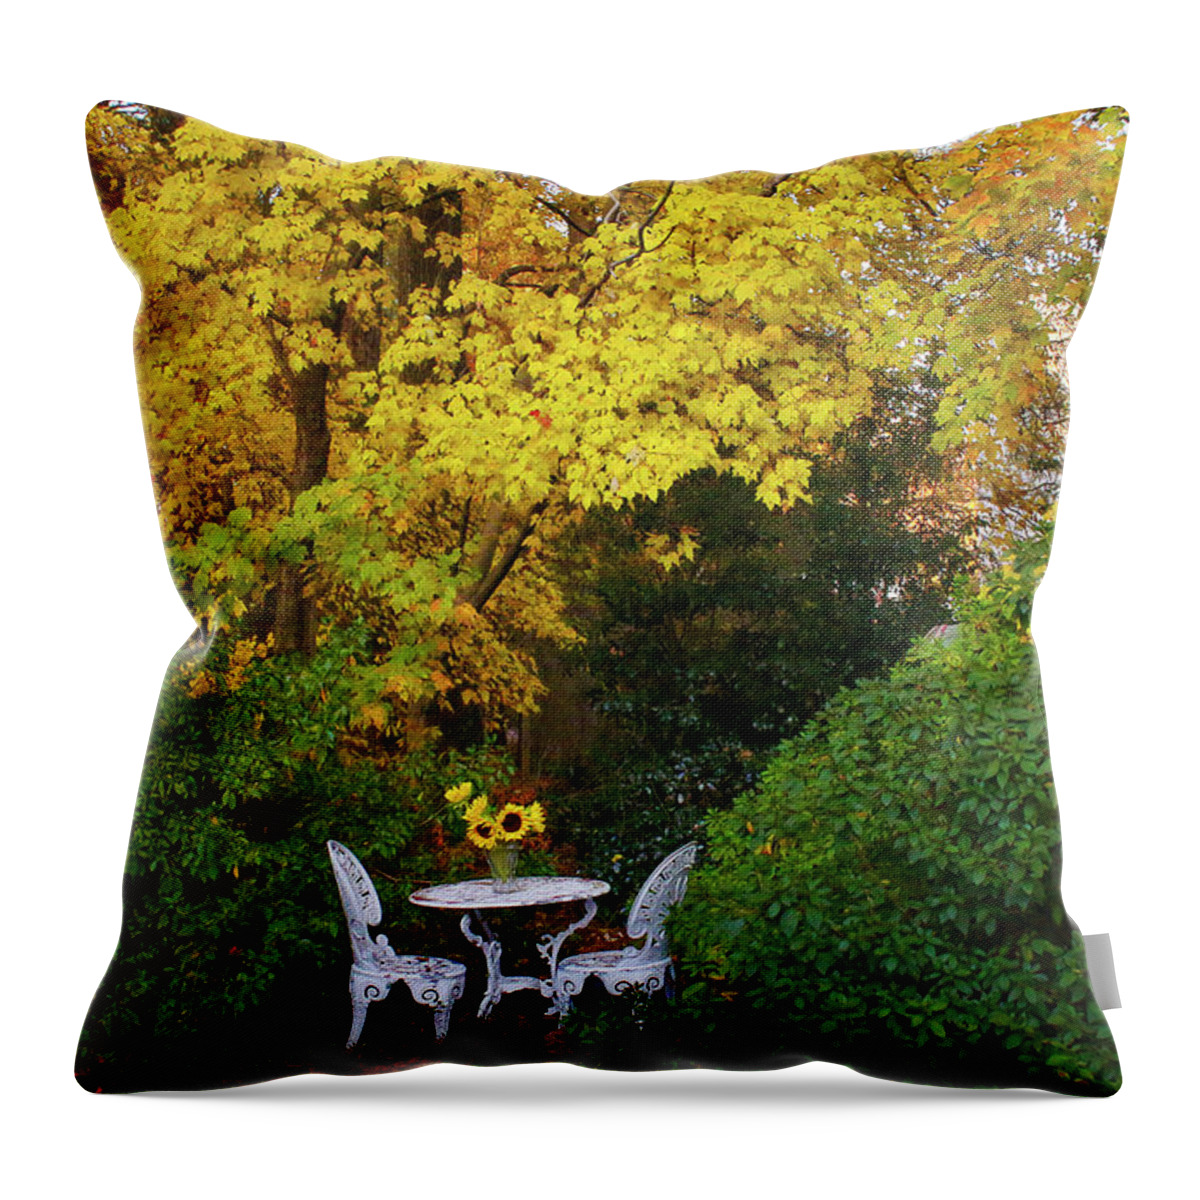 Yellow Foliage Throw Pillow featuring the photograph Let's Dine Under Autumn's Golden Canopy by Ola Allen